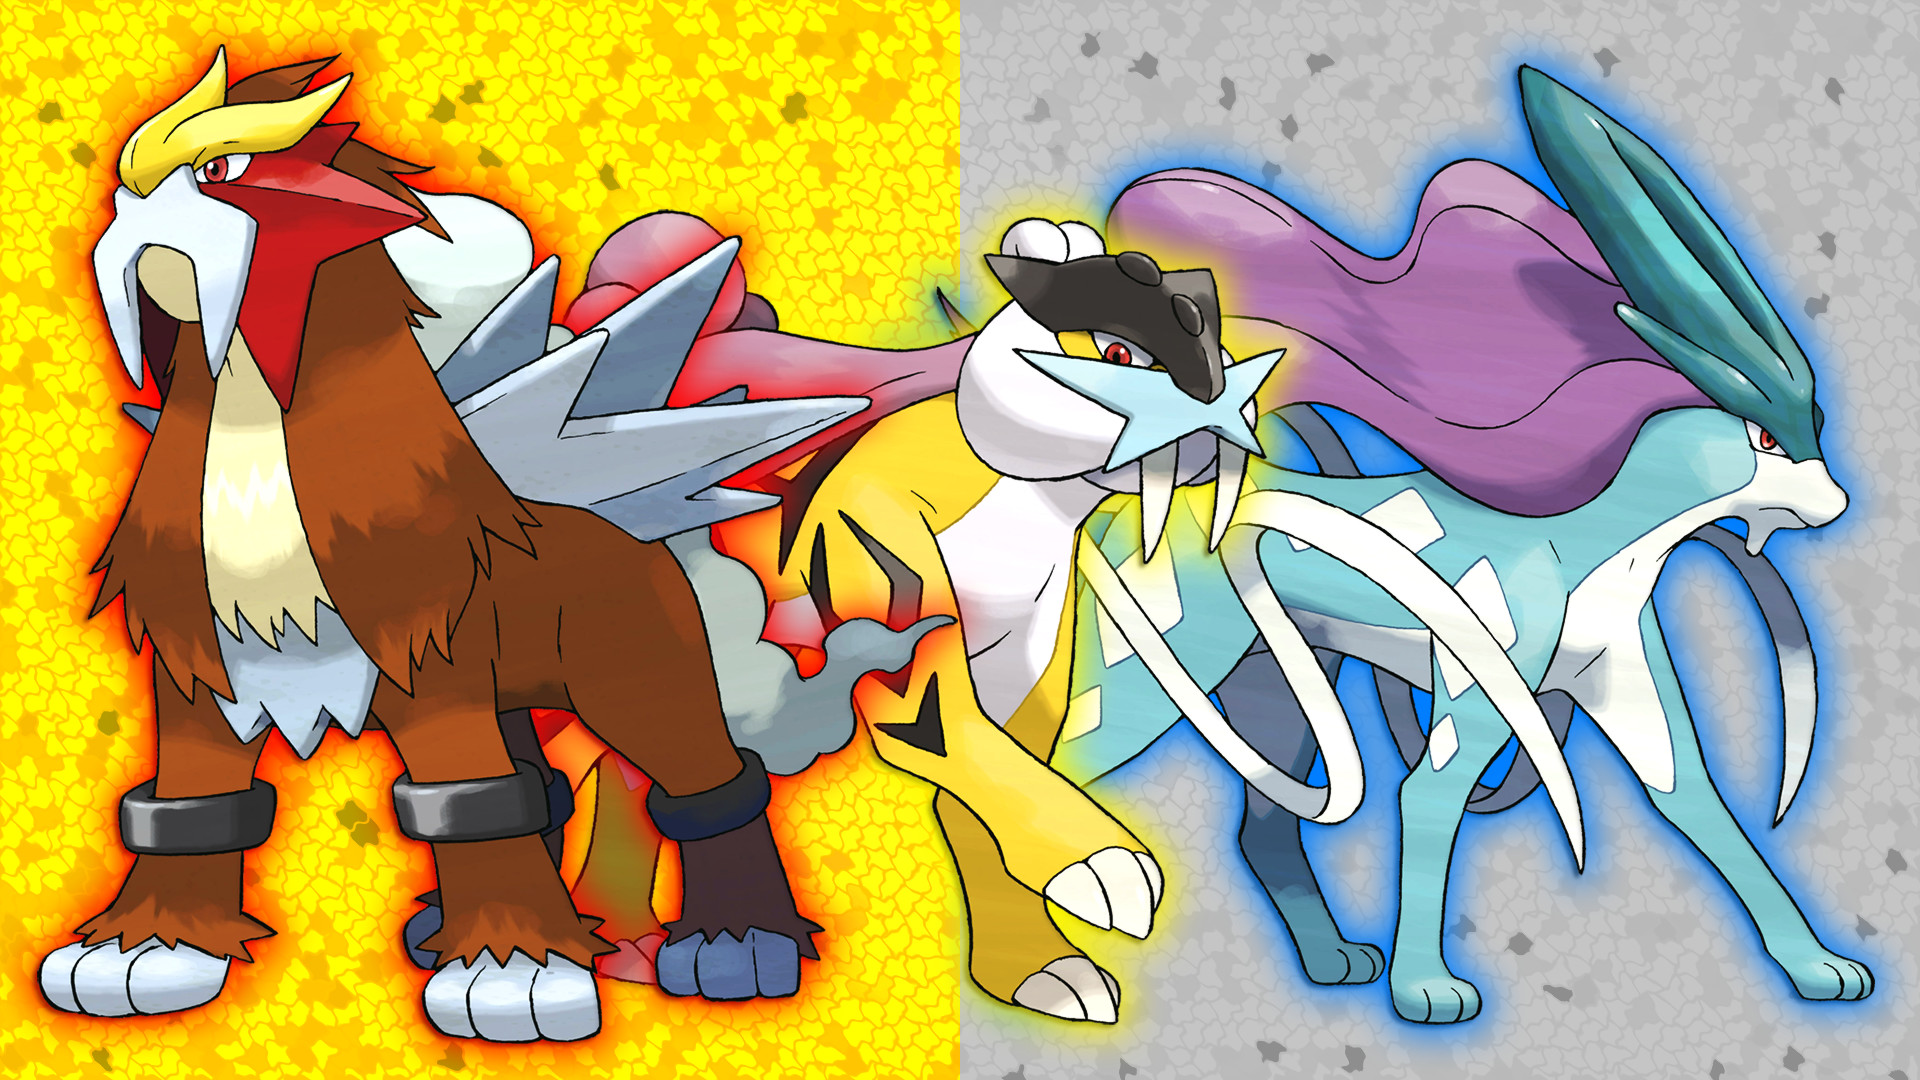 1920x1080 Entei, Raikou and Suicune Wallpaper (V2) by Glench